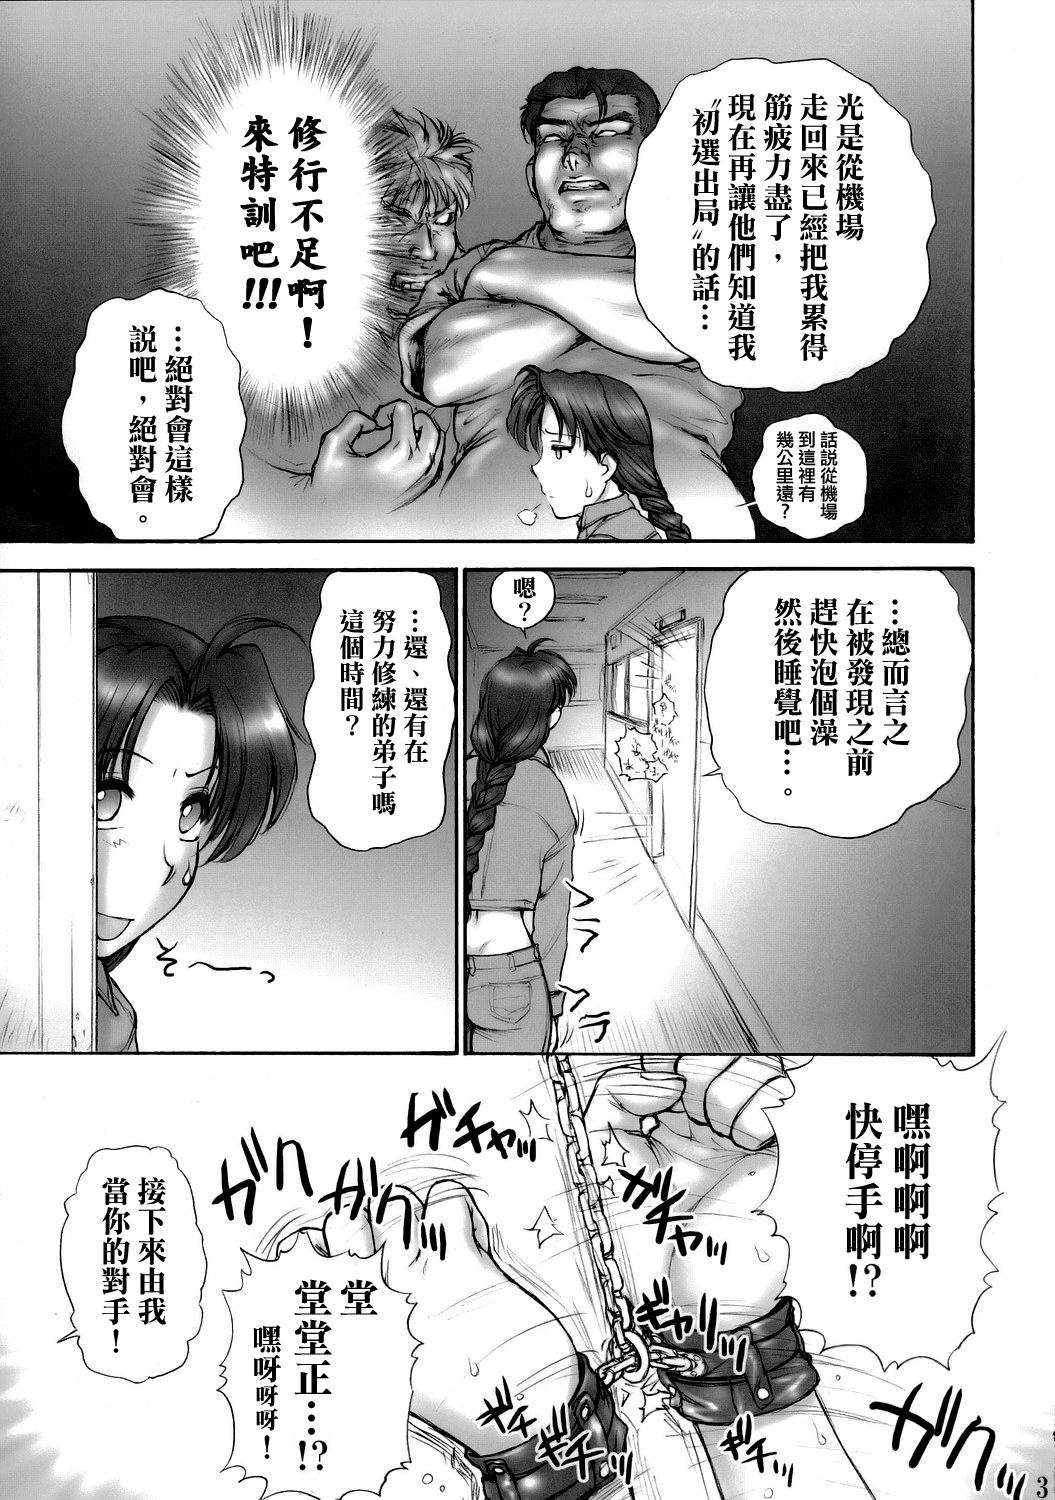 Hardcorend (SC29) [Shinnihon Pepsitou (St. Germain-sal)] Report Concerning Kyoku-gen-ryuu (The King of Fighters) [Chinese] [日祈漢化] - King of fighters Jerk - Page 5